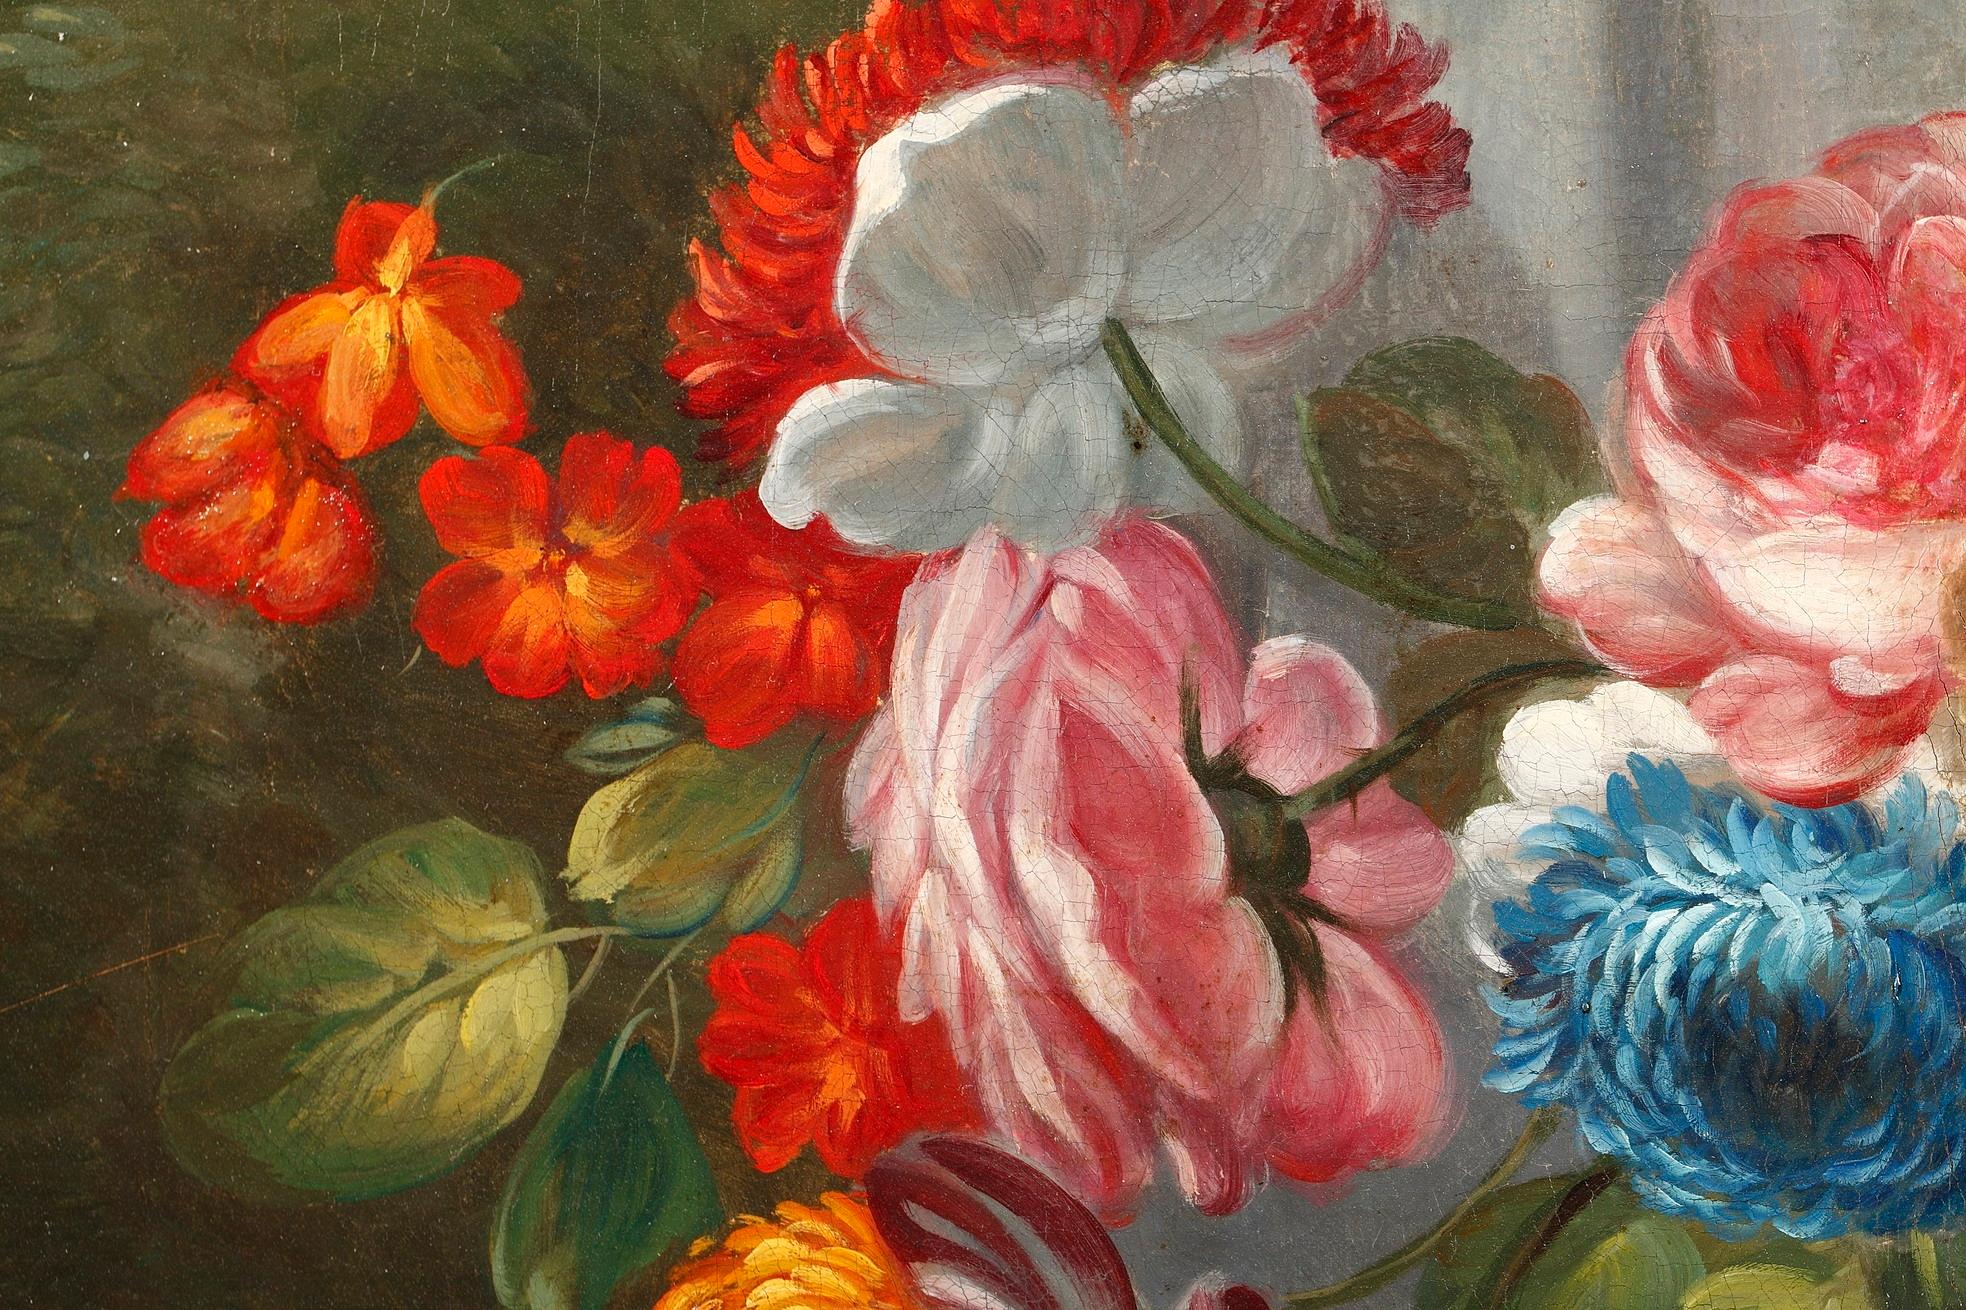 Large painting featuring a still life with fruits, roses, tulips, forget-me-not and other flowers in urns decorated with putti. The urns are set on columns, in a classical garden landscape. This baroque painting was realized in the mid-nineteenth